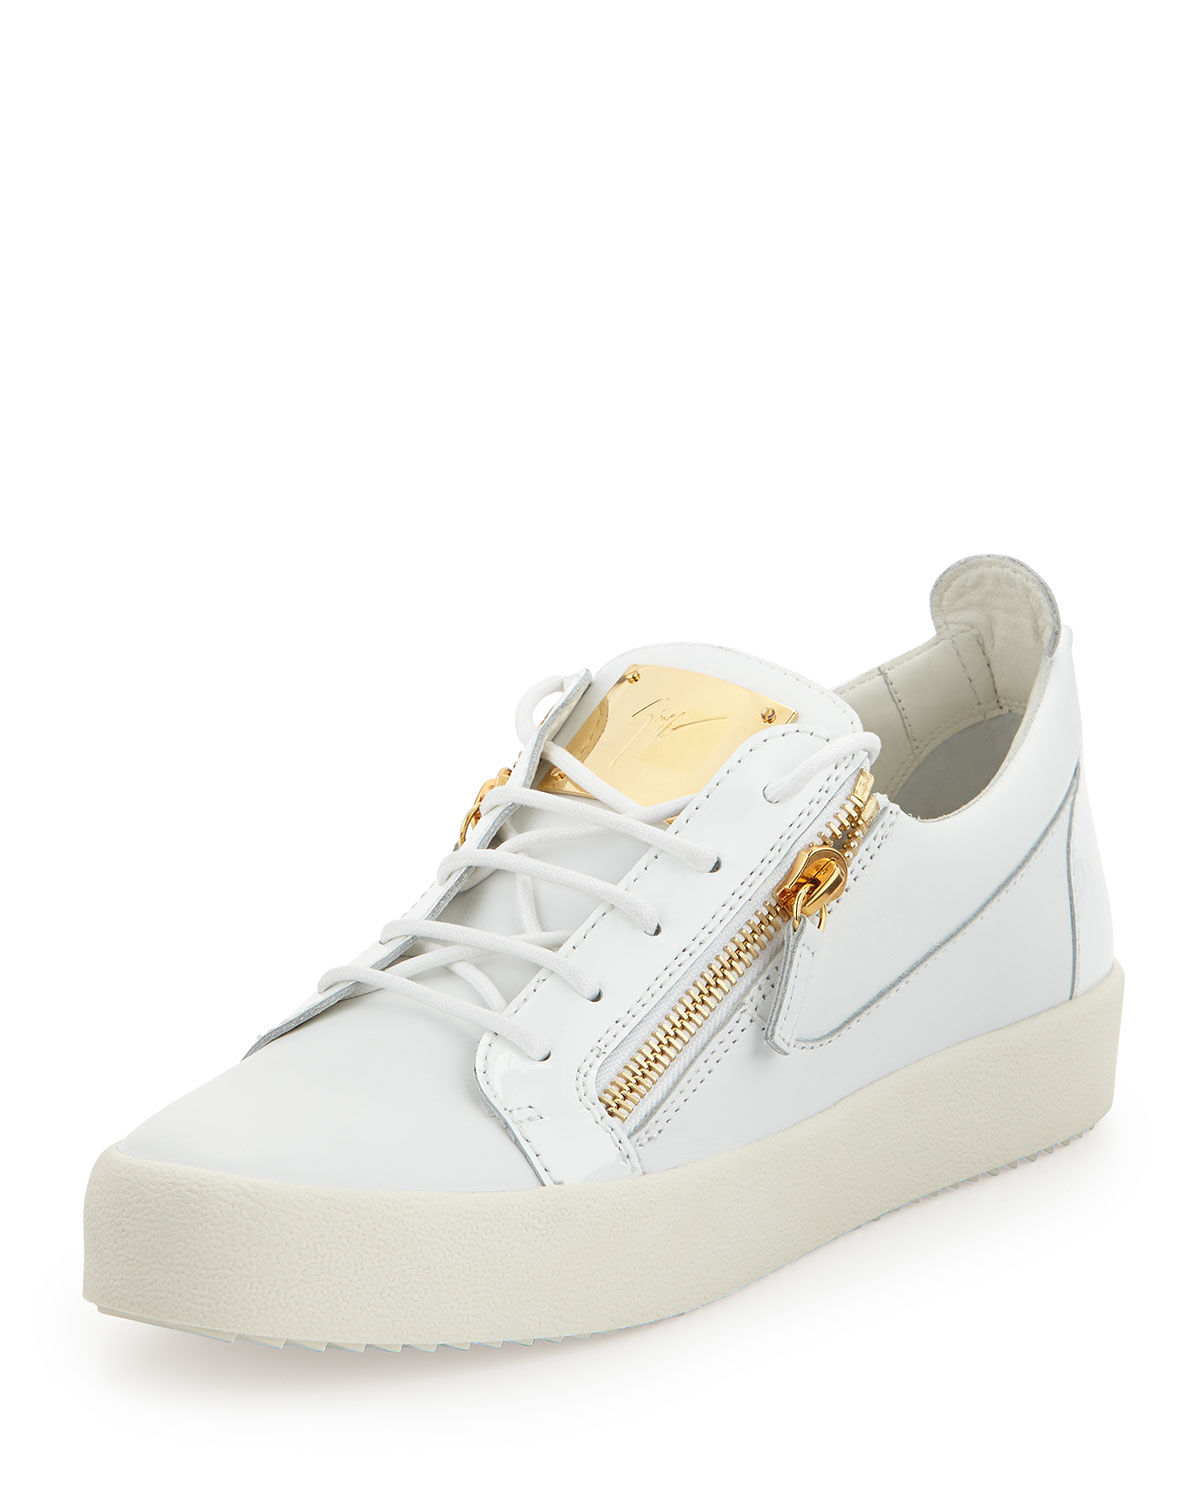 Giuseppe zanotti Leather Low-Top Sneakers in White for Men | Lyst